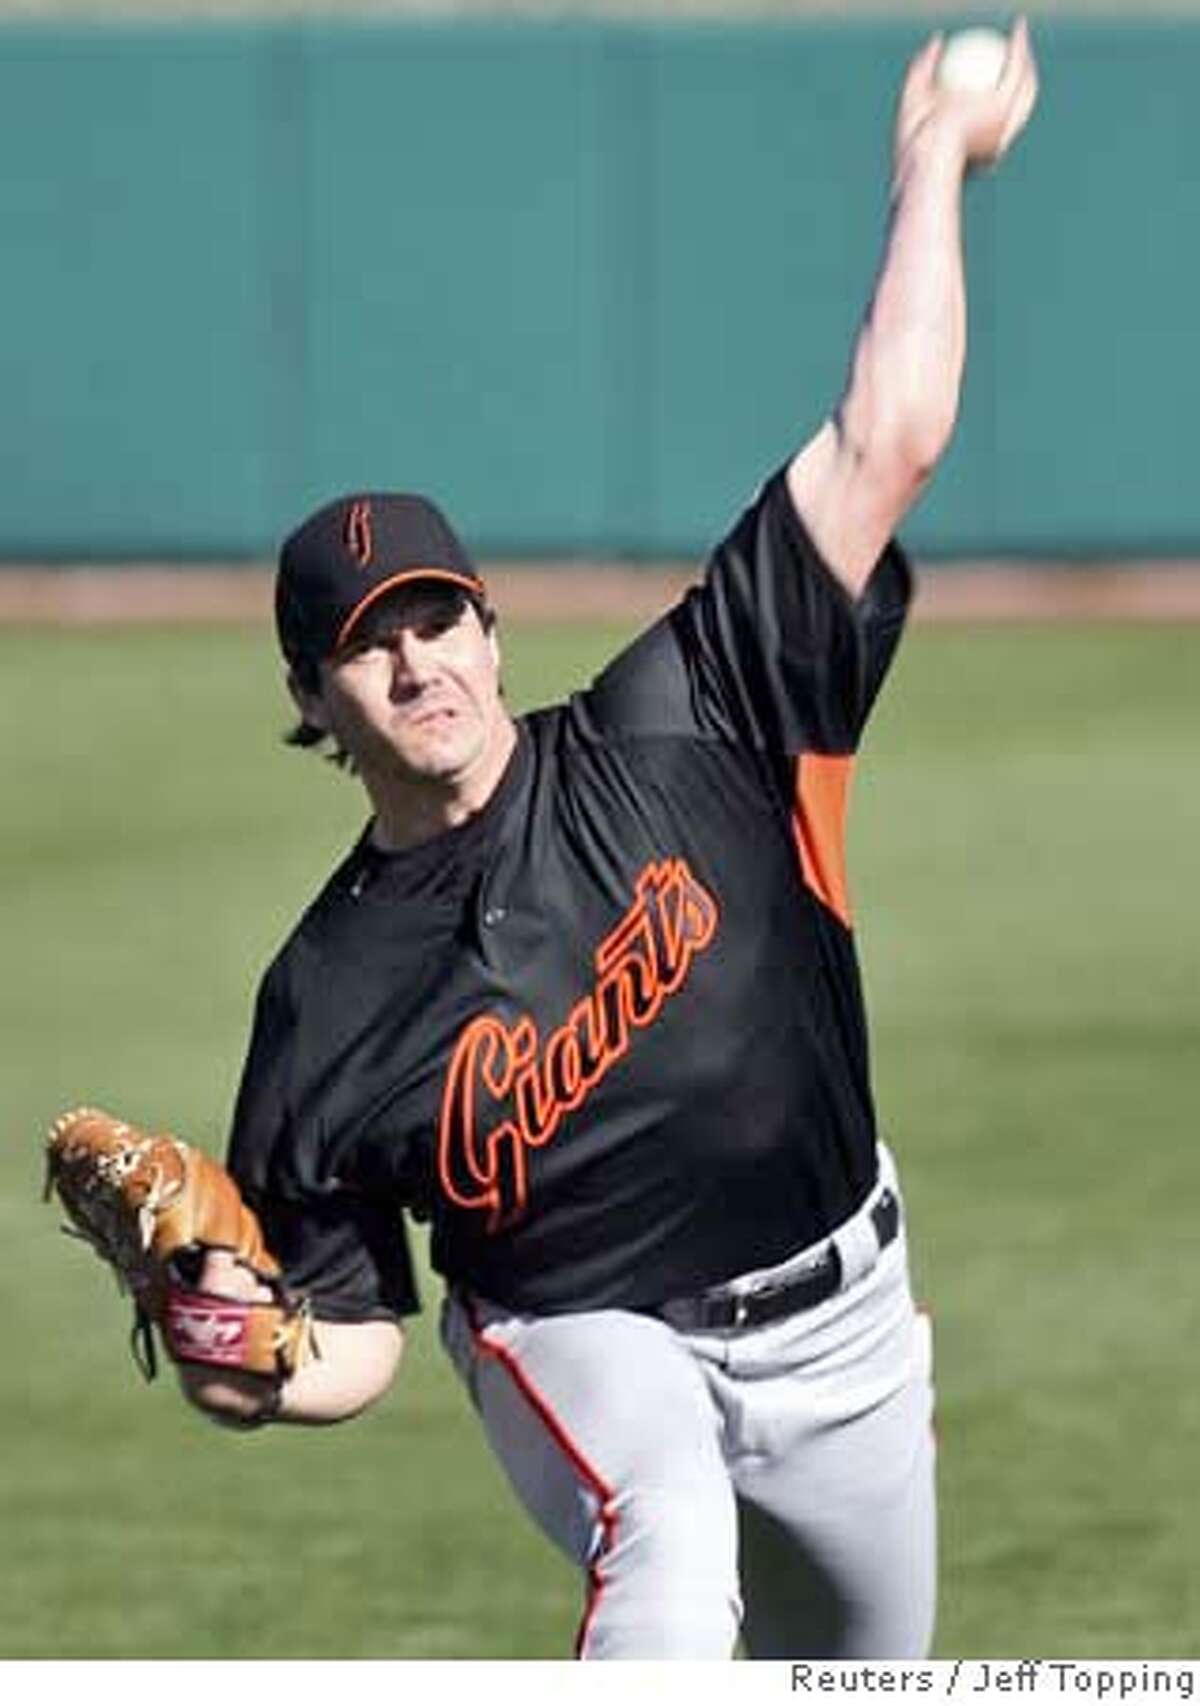 San Francisco Giants pitcher Barry Zito throws during spring training drills at the team's winter baseball camp in Scottsdale, Arizona, February 16, 2007. REUTERS/Jeff Topping (UNITED STATES)